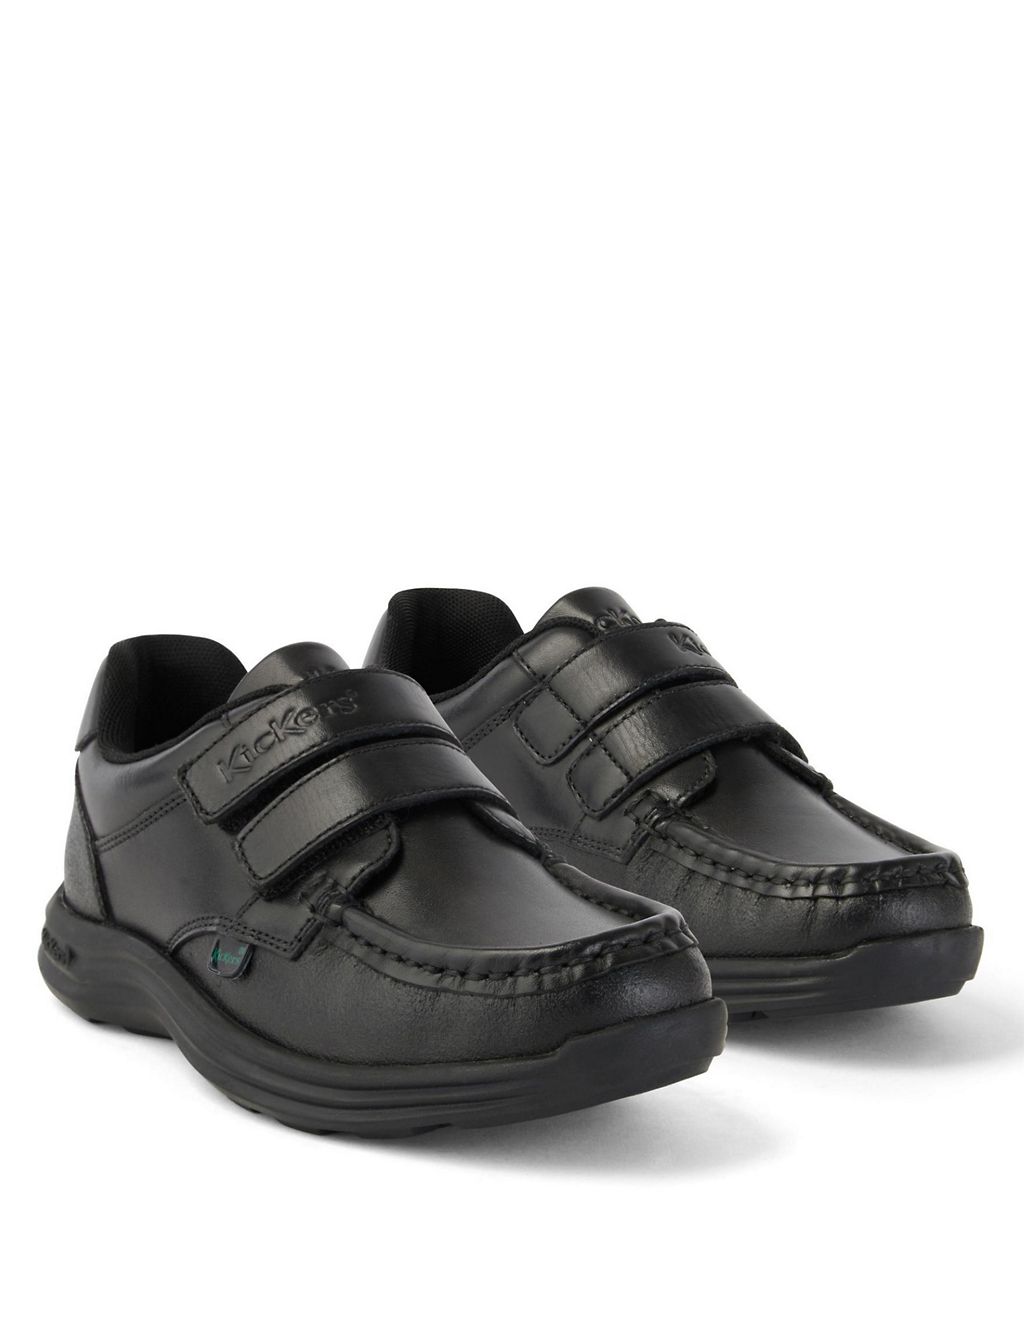 Kids' Leather Riptape School Shoes 1 of 5